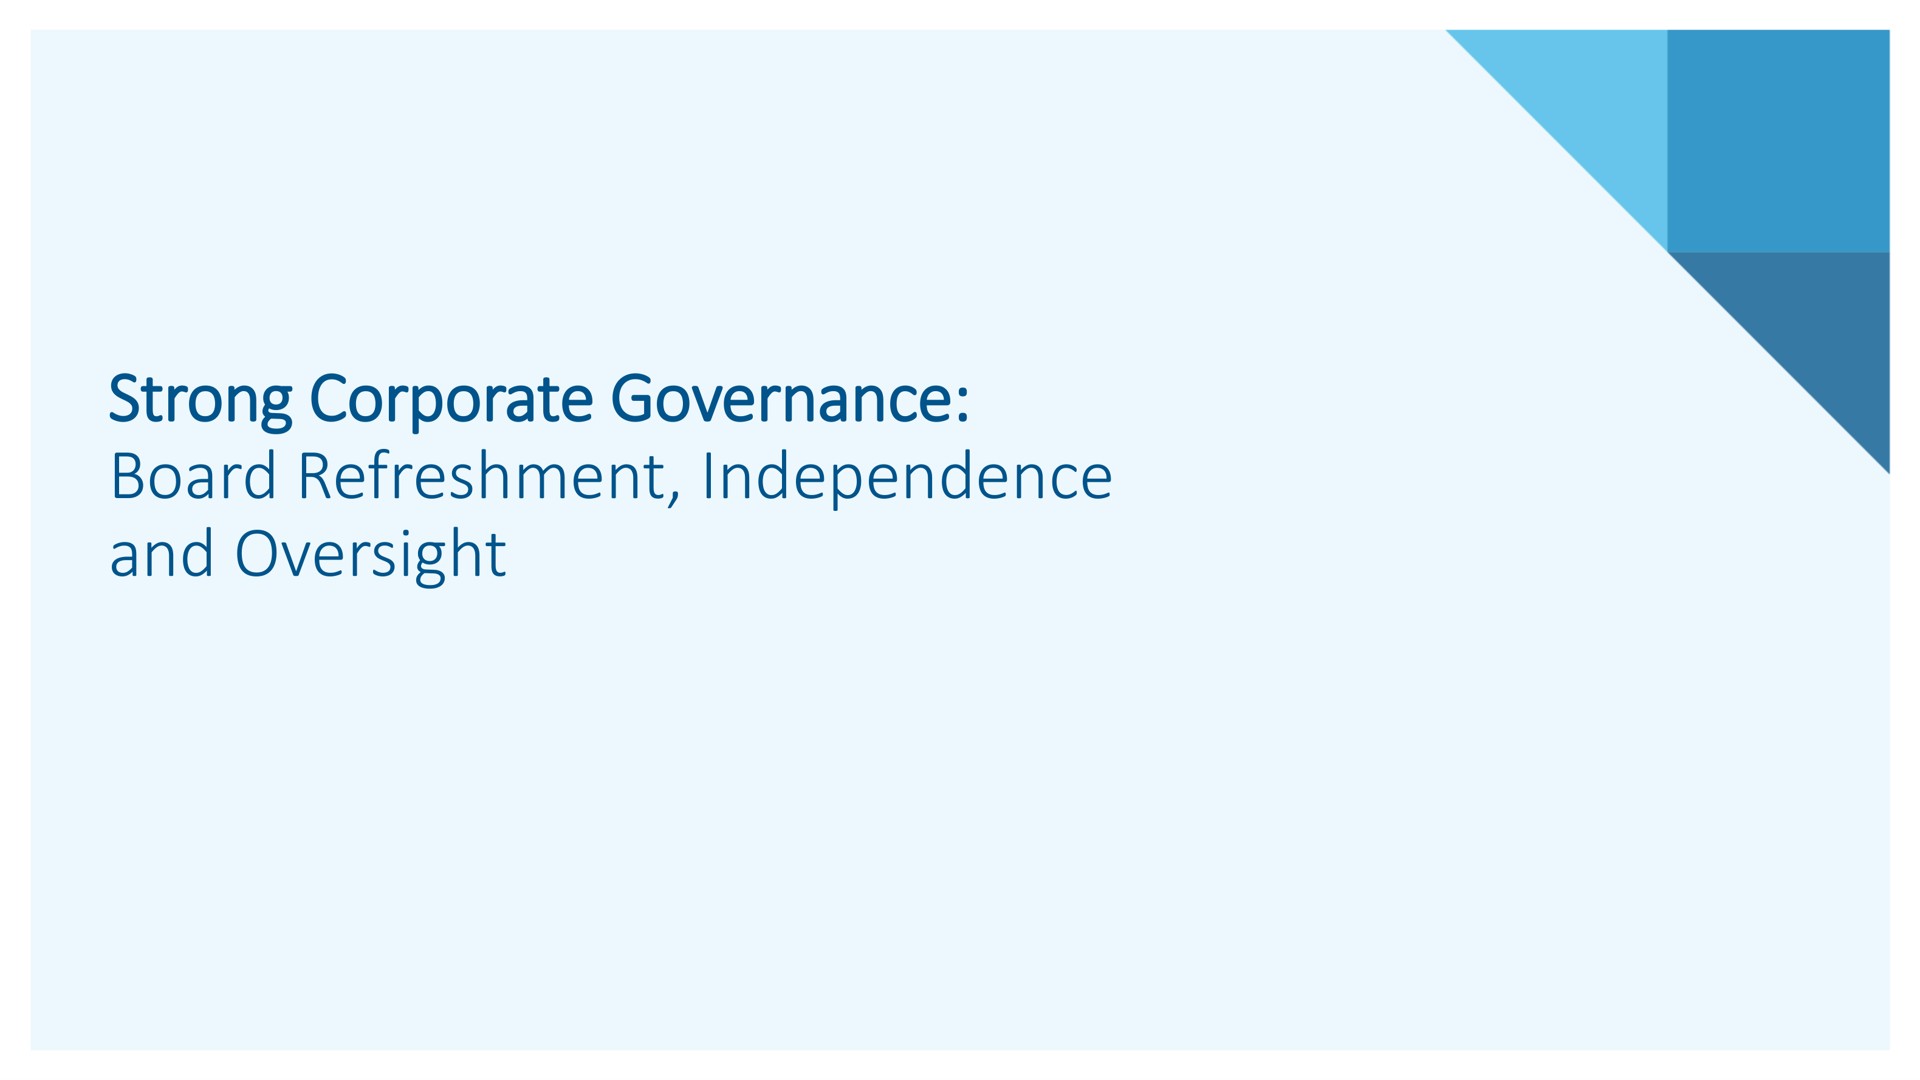 strong corporate governance board refreshment independence and oversight | Alkermes